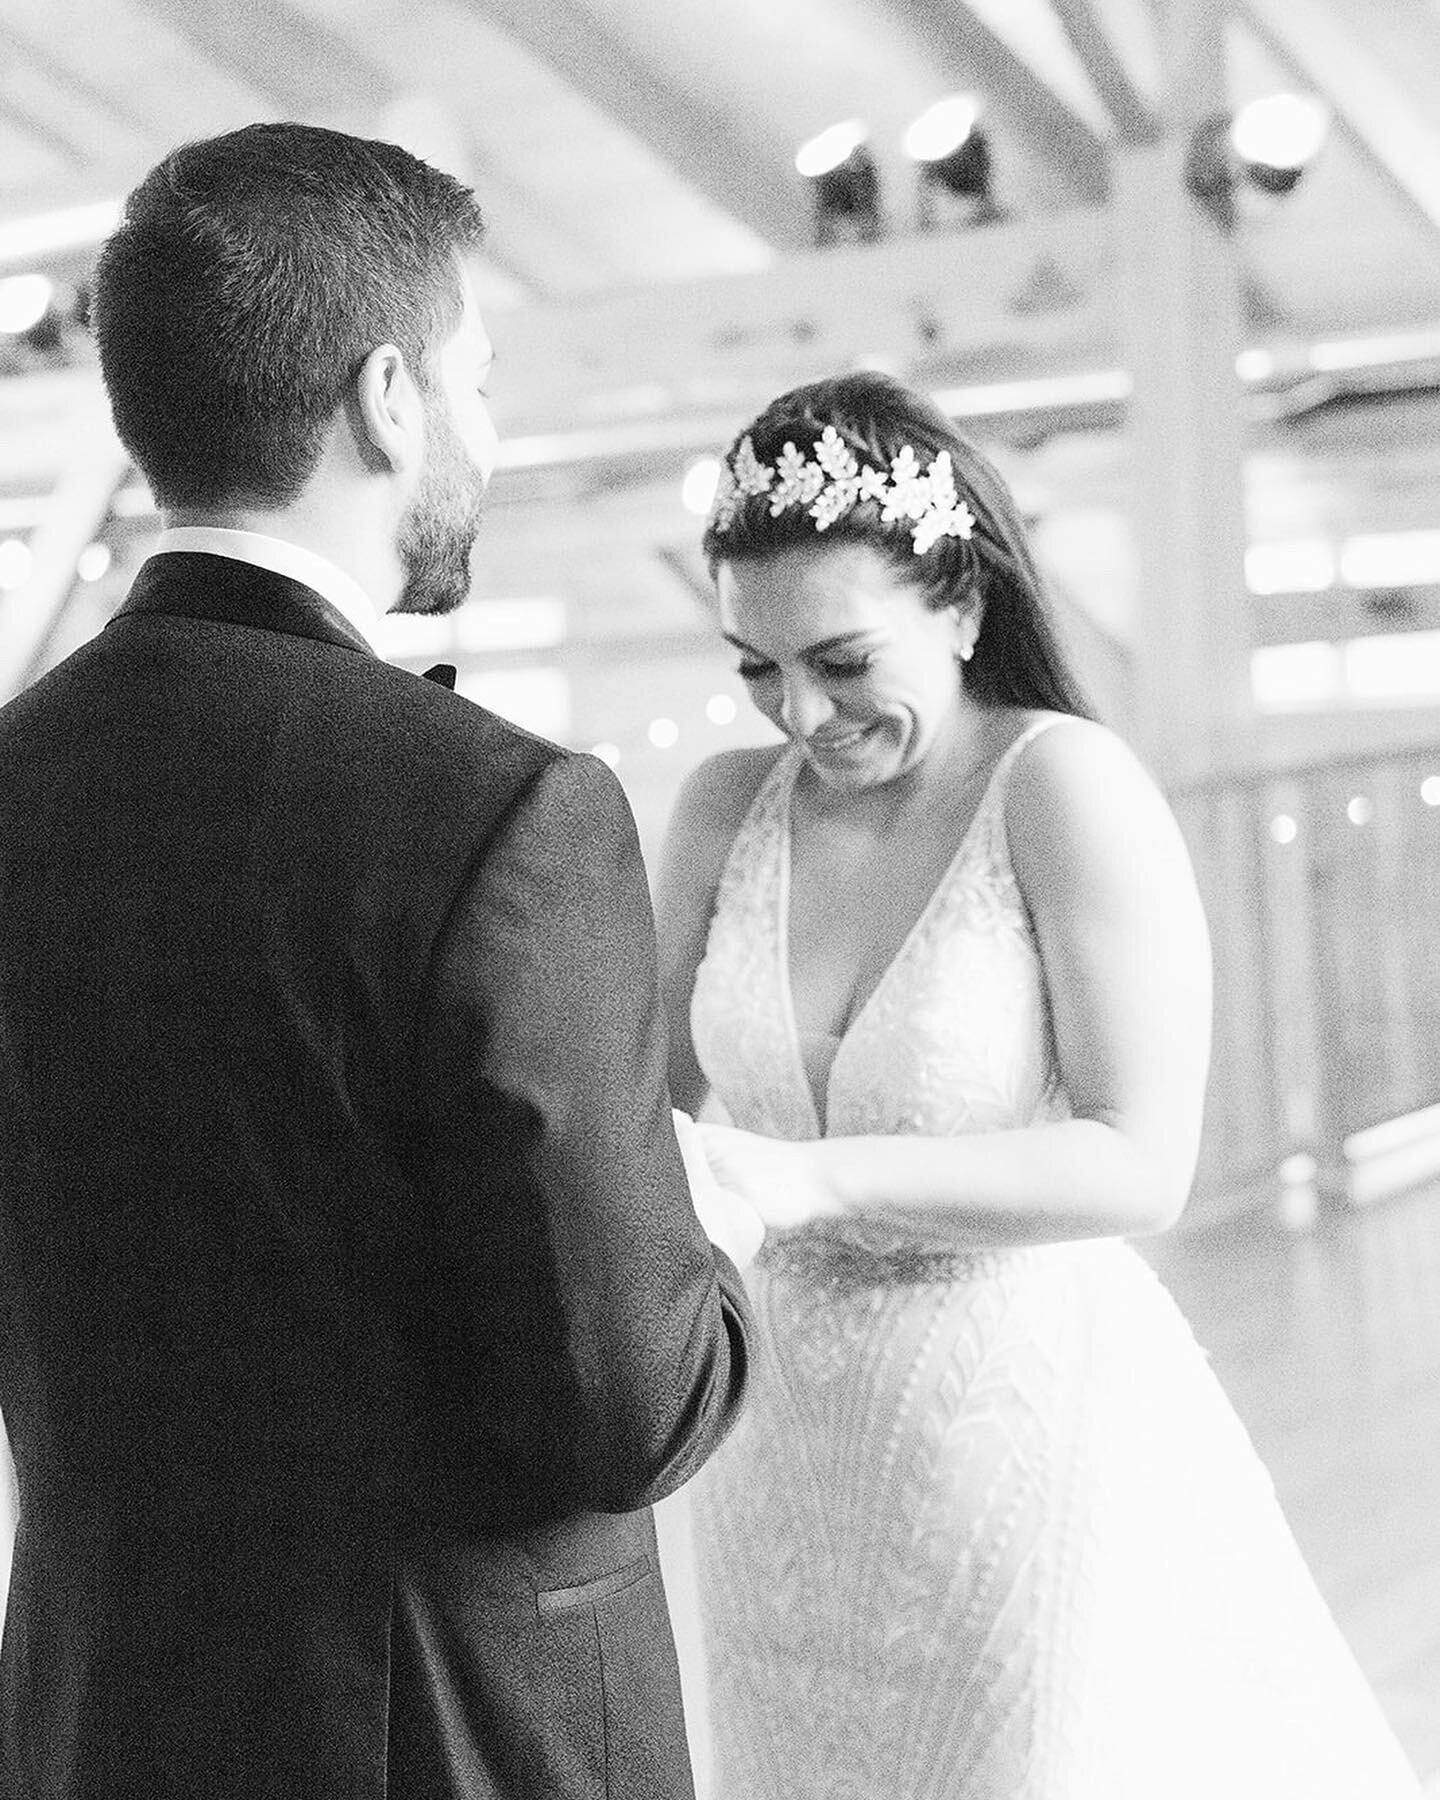 THESE ARE THE MOMENTS. 
⠀⠀⠀⠀⠀⠀⠀⠀⠀
⠀⠀⠀⠀⠀⠀⠀⠀⠀
our planning style requires our couples to care about the moments, the emotions, the experience. we believe in making it beautiful but where we begin and end is how you want to feel on your wedding day.
⠀⠀⠀